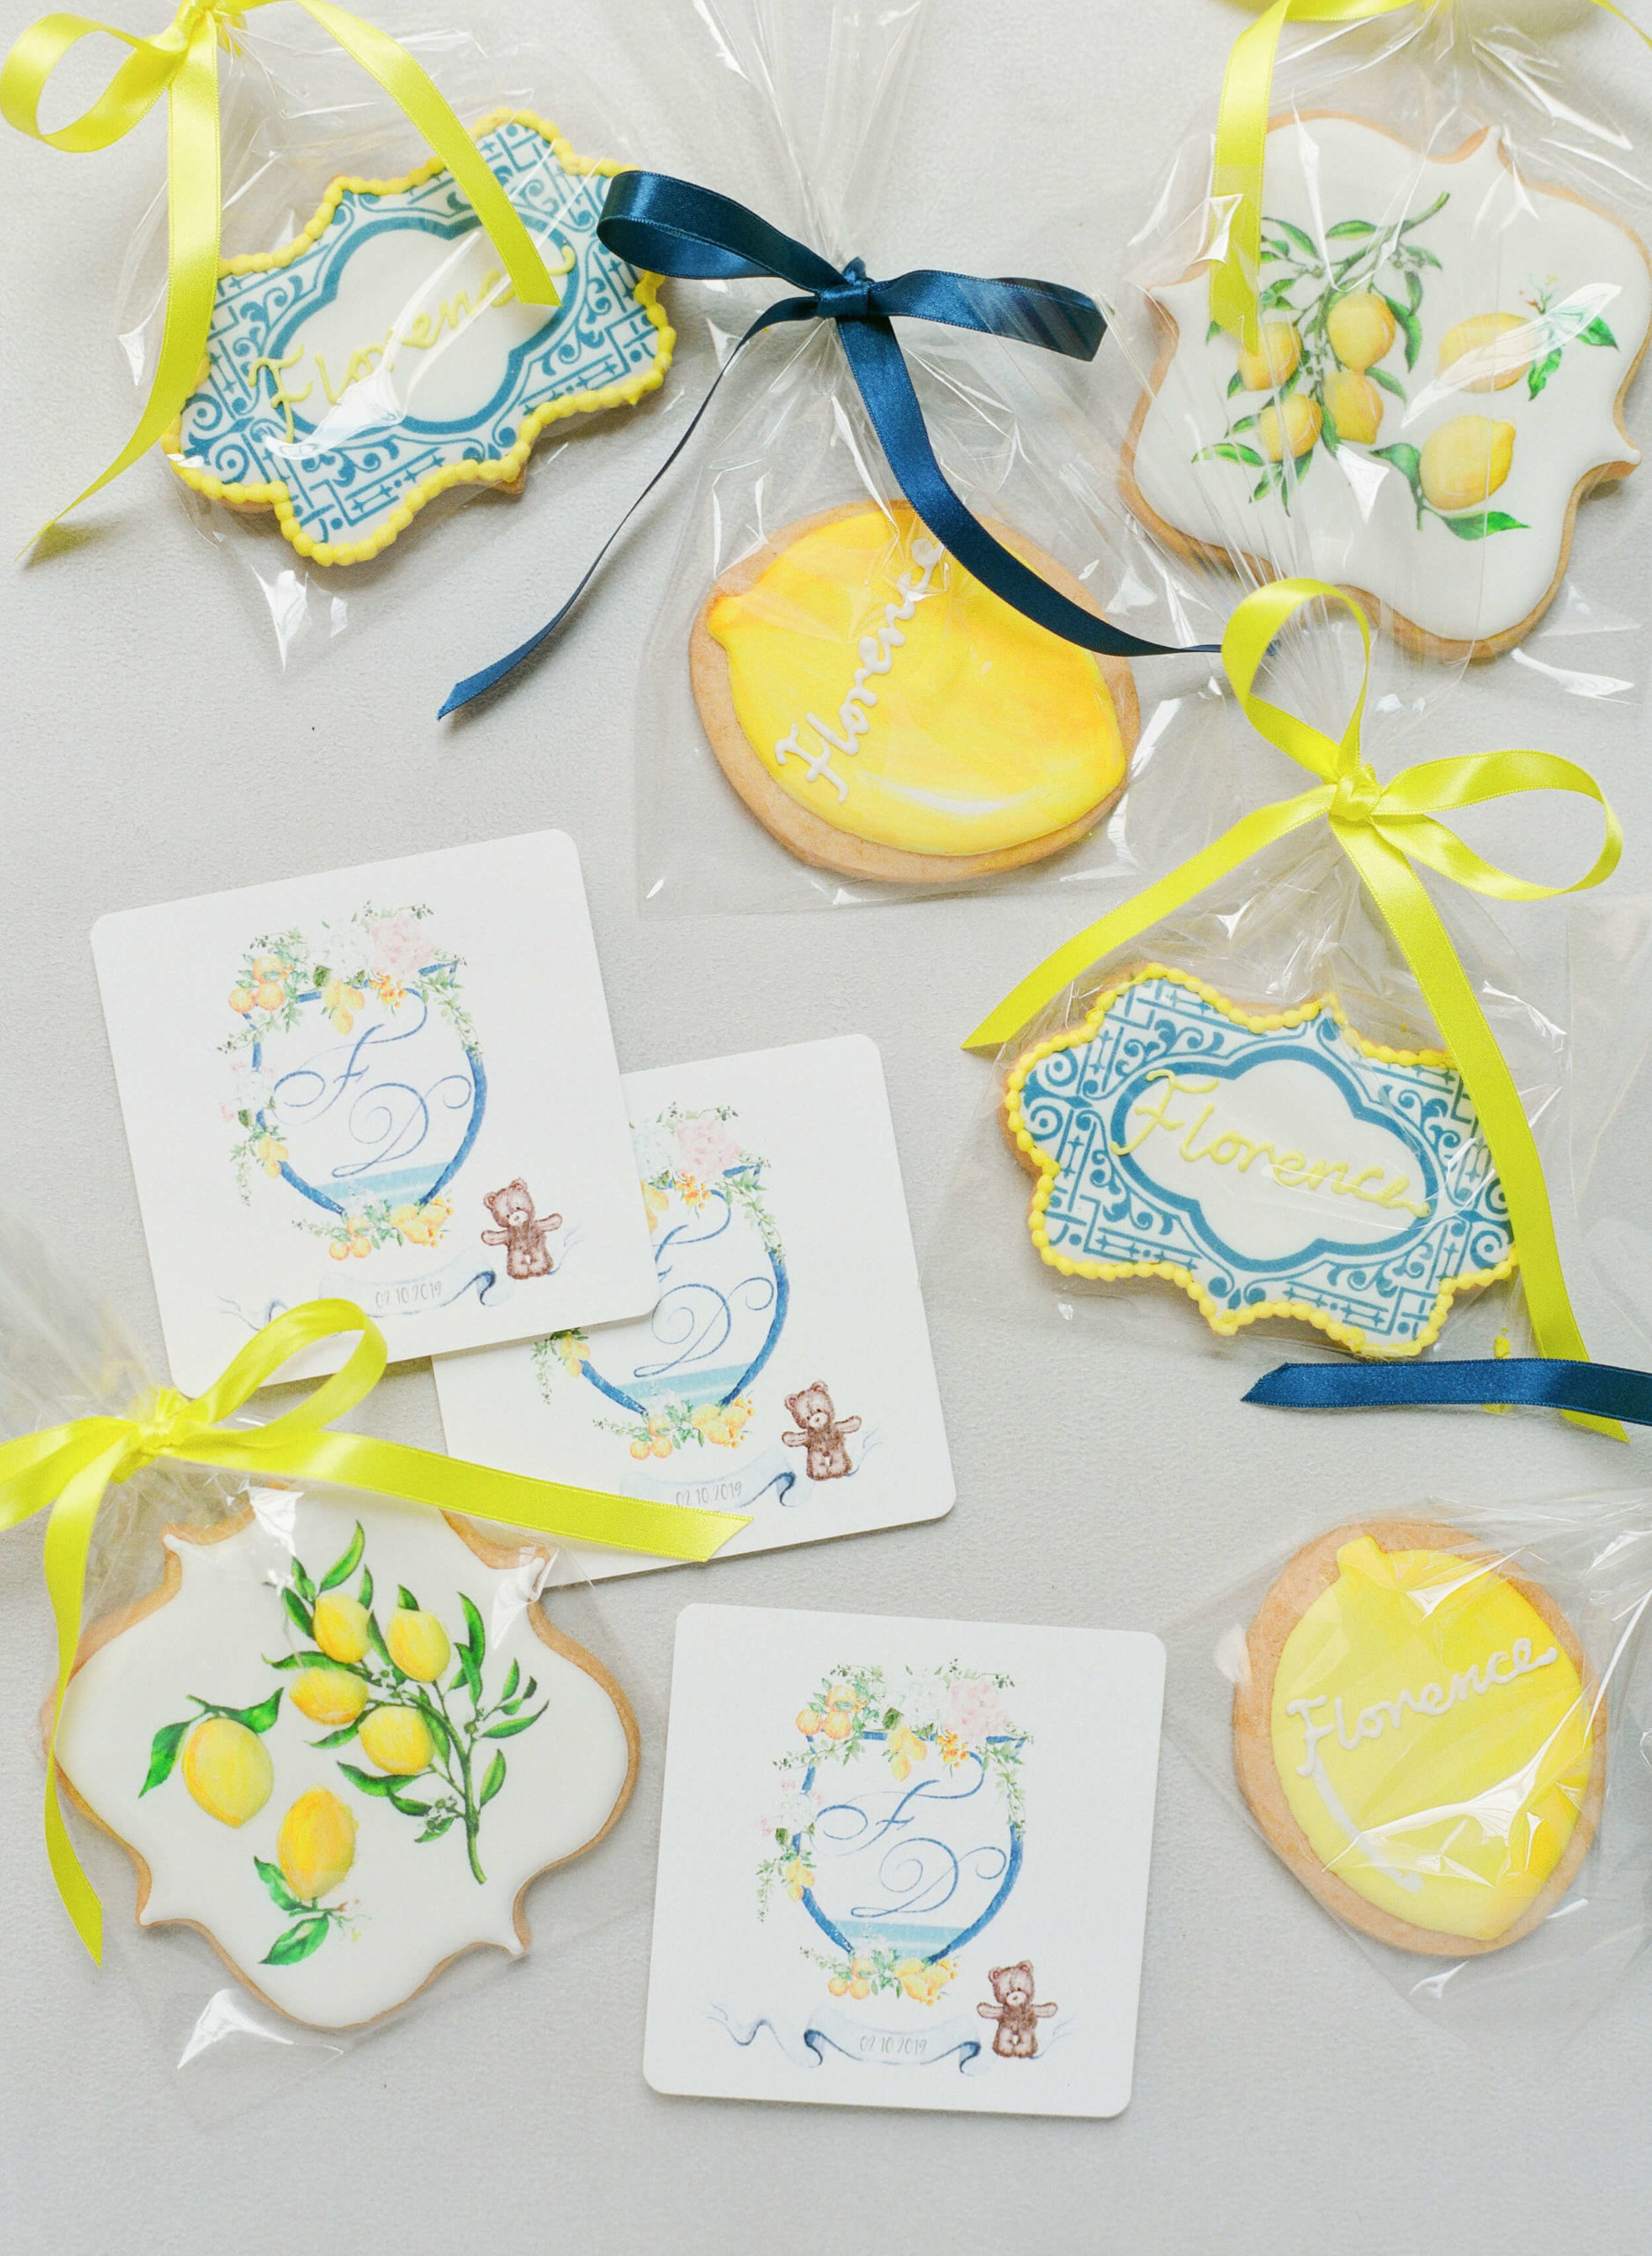 100th day celebration decorated cookie favors